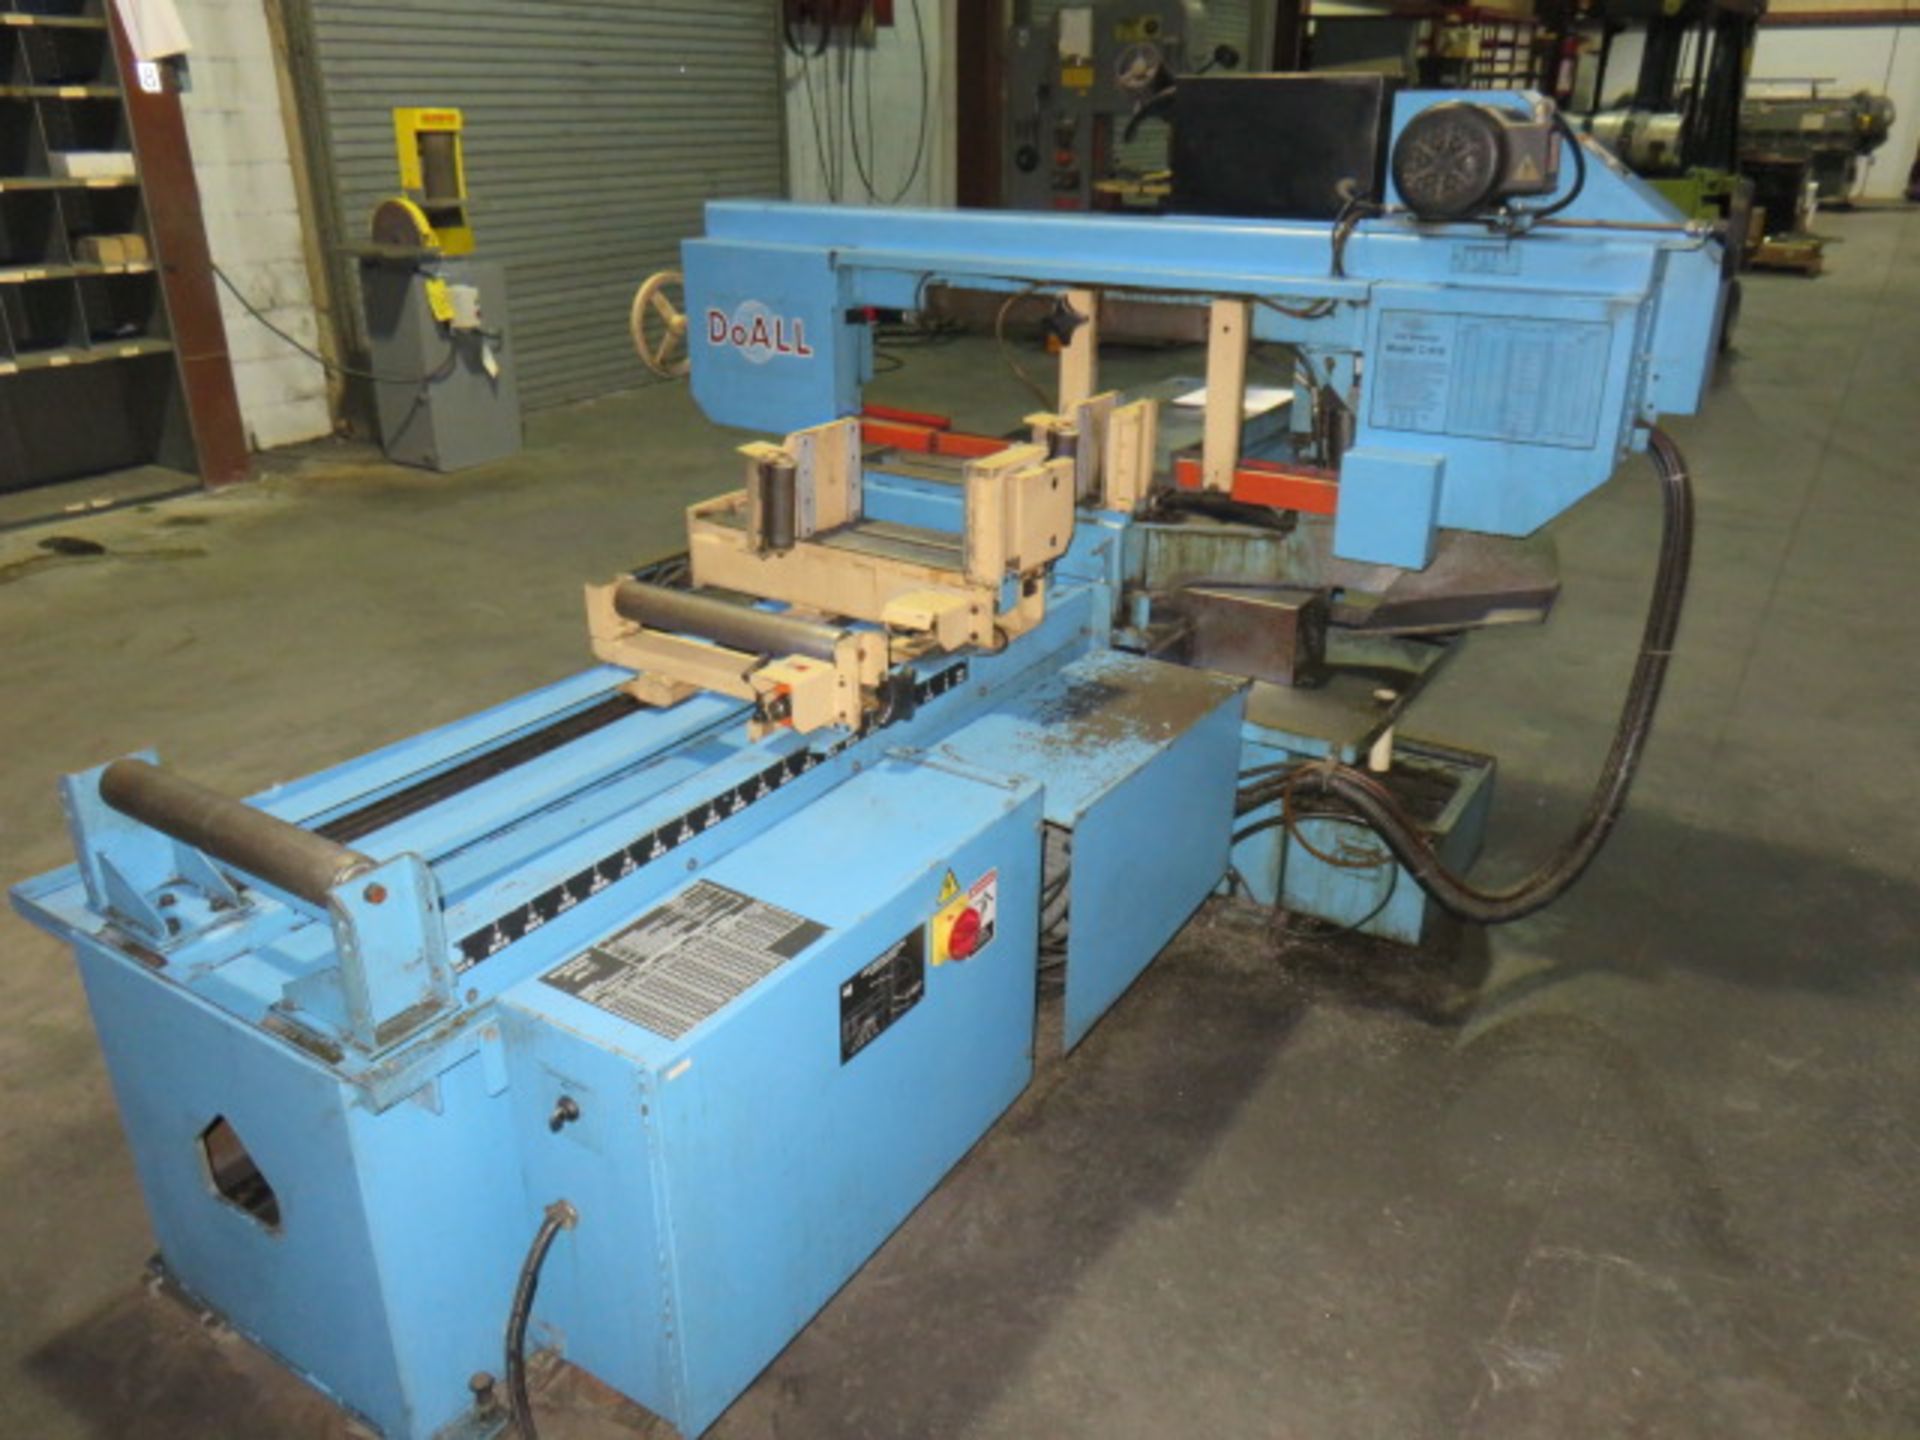 1998 DOALL C-916SA AUTOMATIC SWING ANGLE HORIZONTAL BAND SAW, S/N 533-98169, 9 IN. x 16 IN. - Image 4 of 5